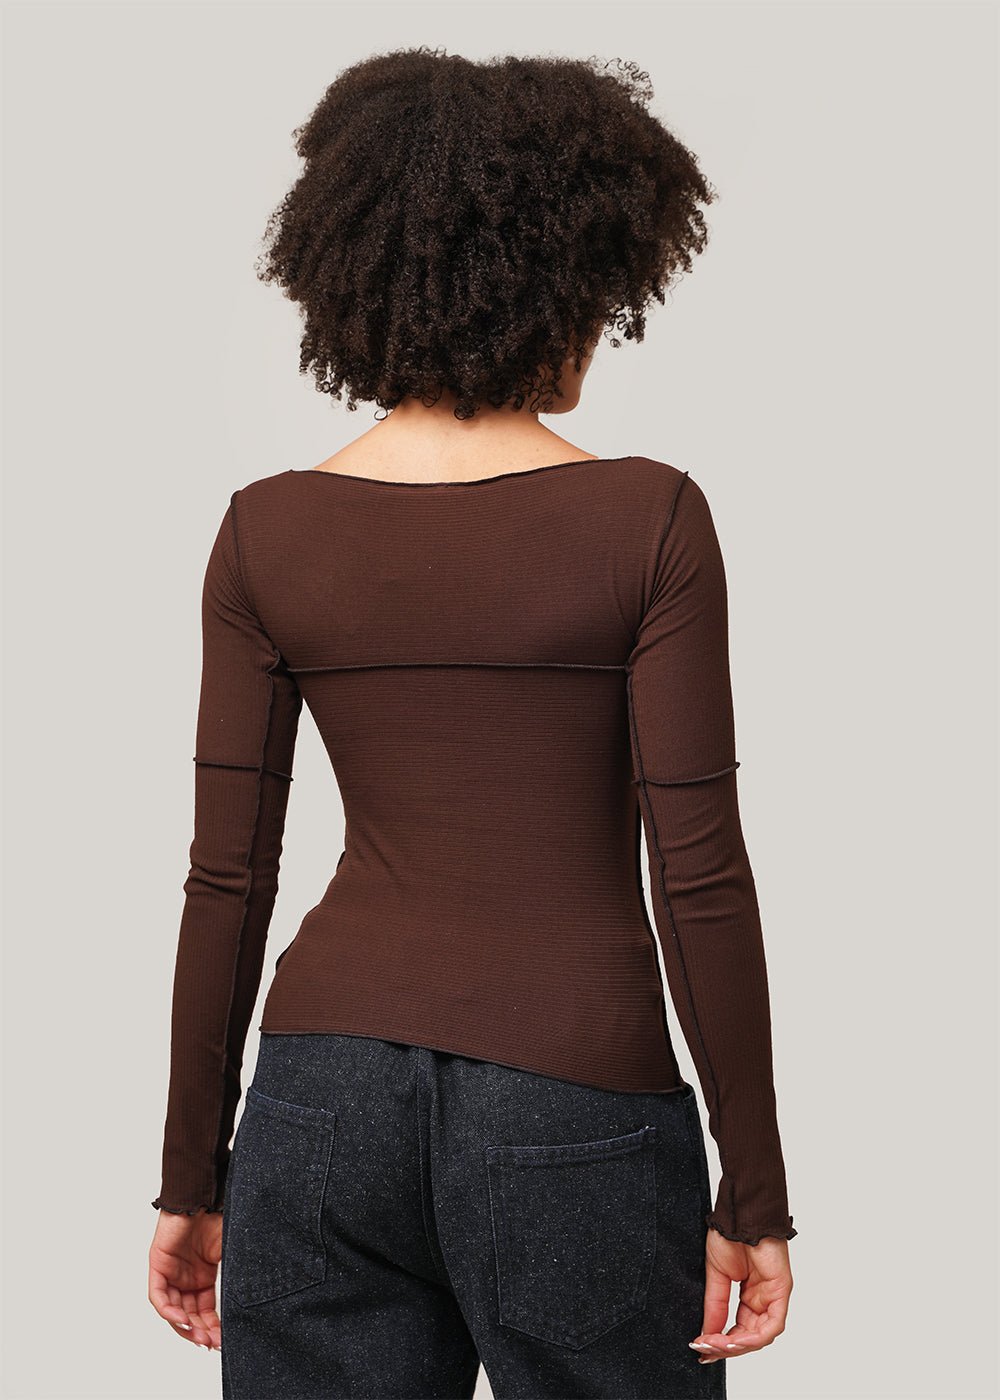 Cinder Long Sleeve Top in Tactile by BASERANGE – New Classics Studios